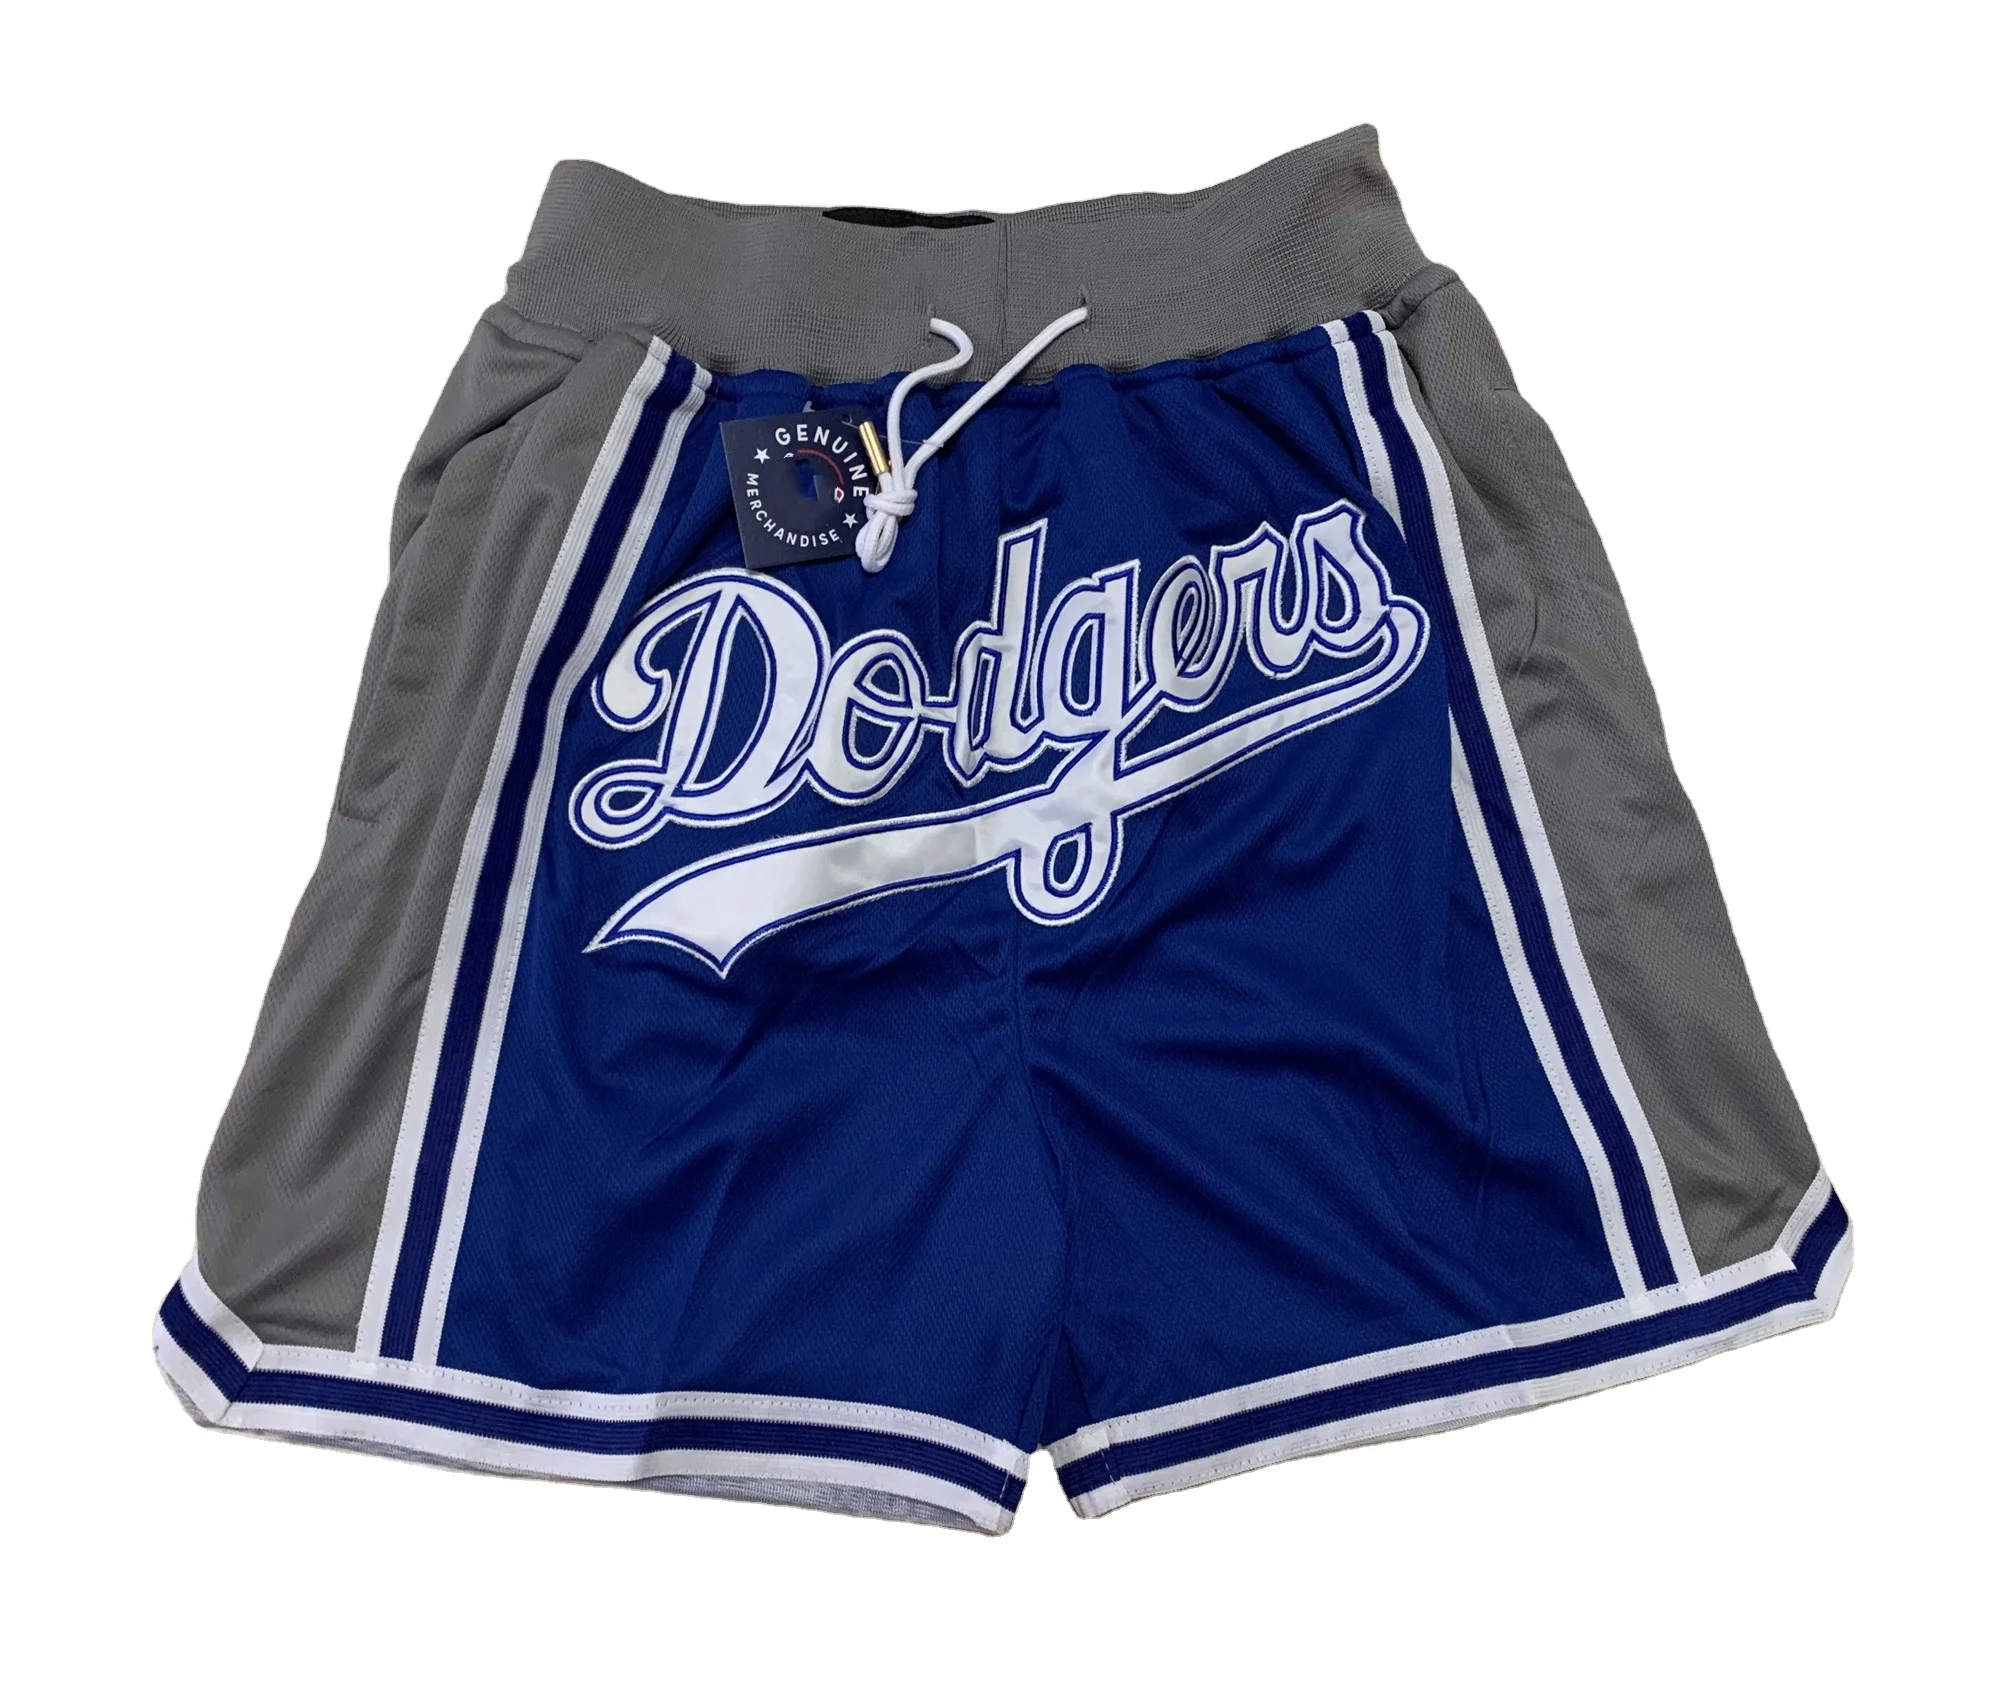 Fashion M Lb Dodger Blue Basketball Shorts Breathable Mesh Shorts High  Quality Embroidered Basketball Men Shorts Gp2020011bk - Buy Basketball